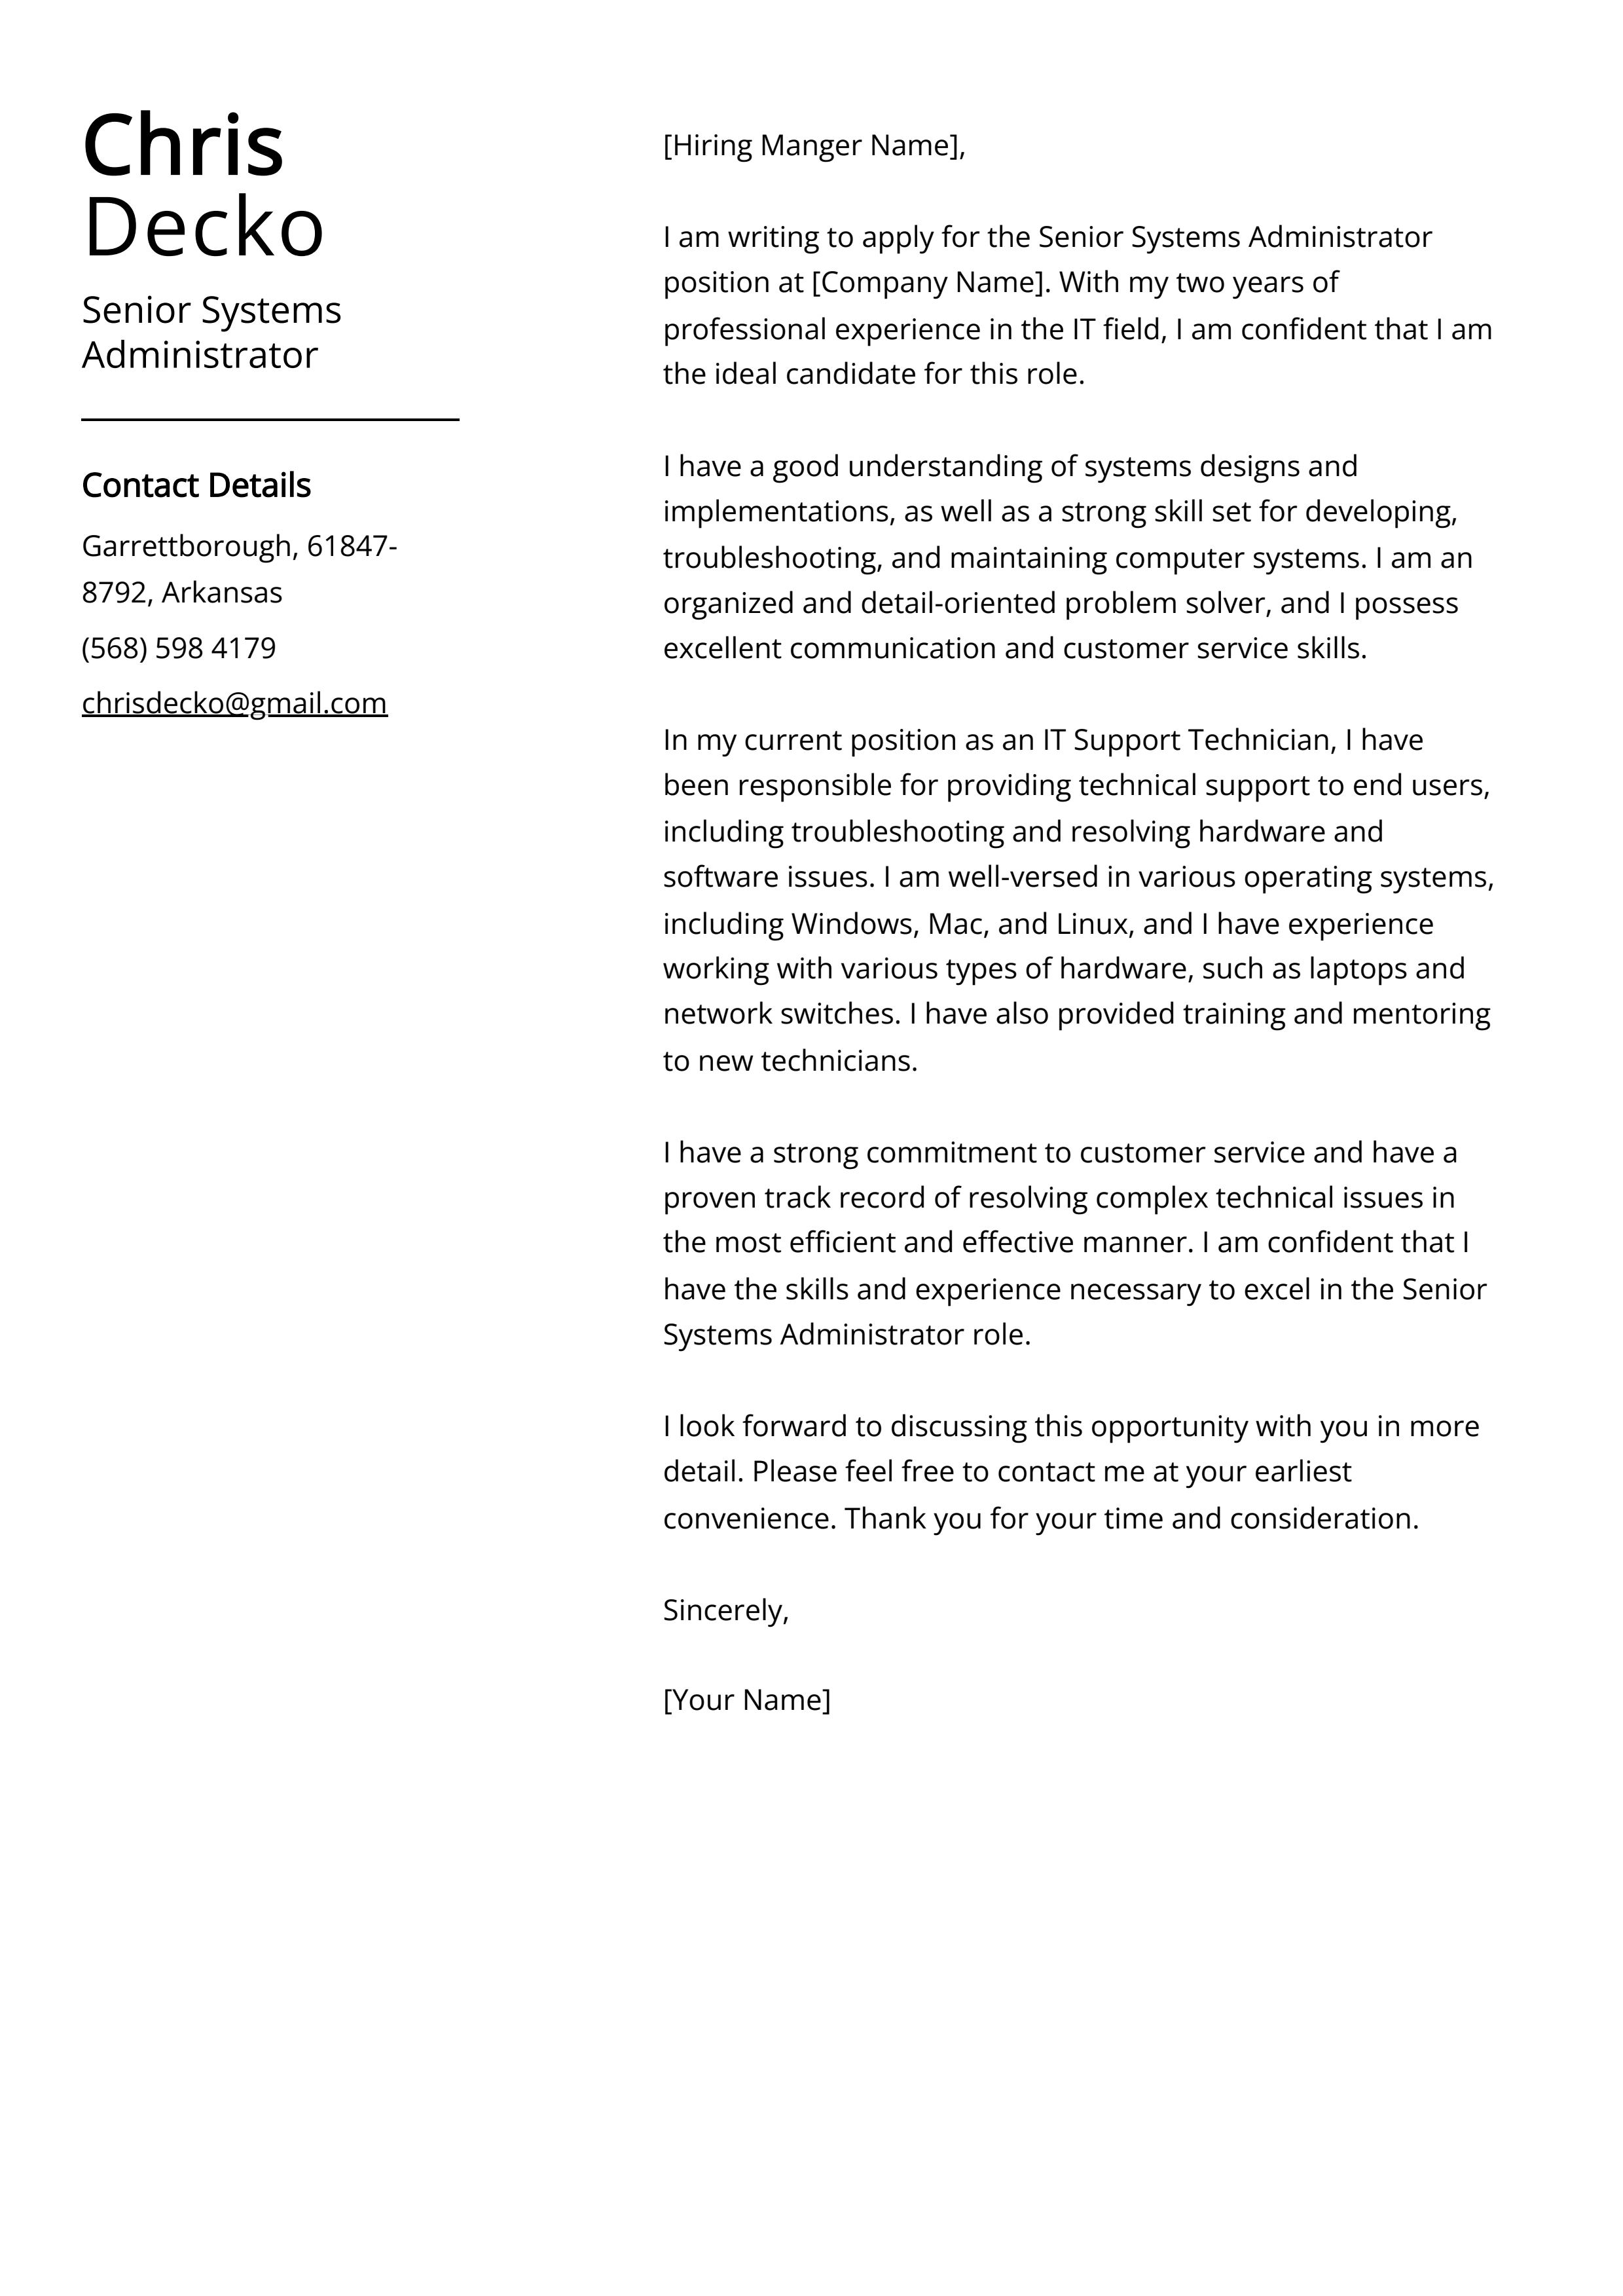 Senior Systems Administrator Cover Letter Example